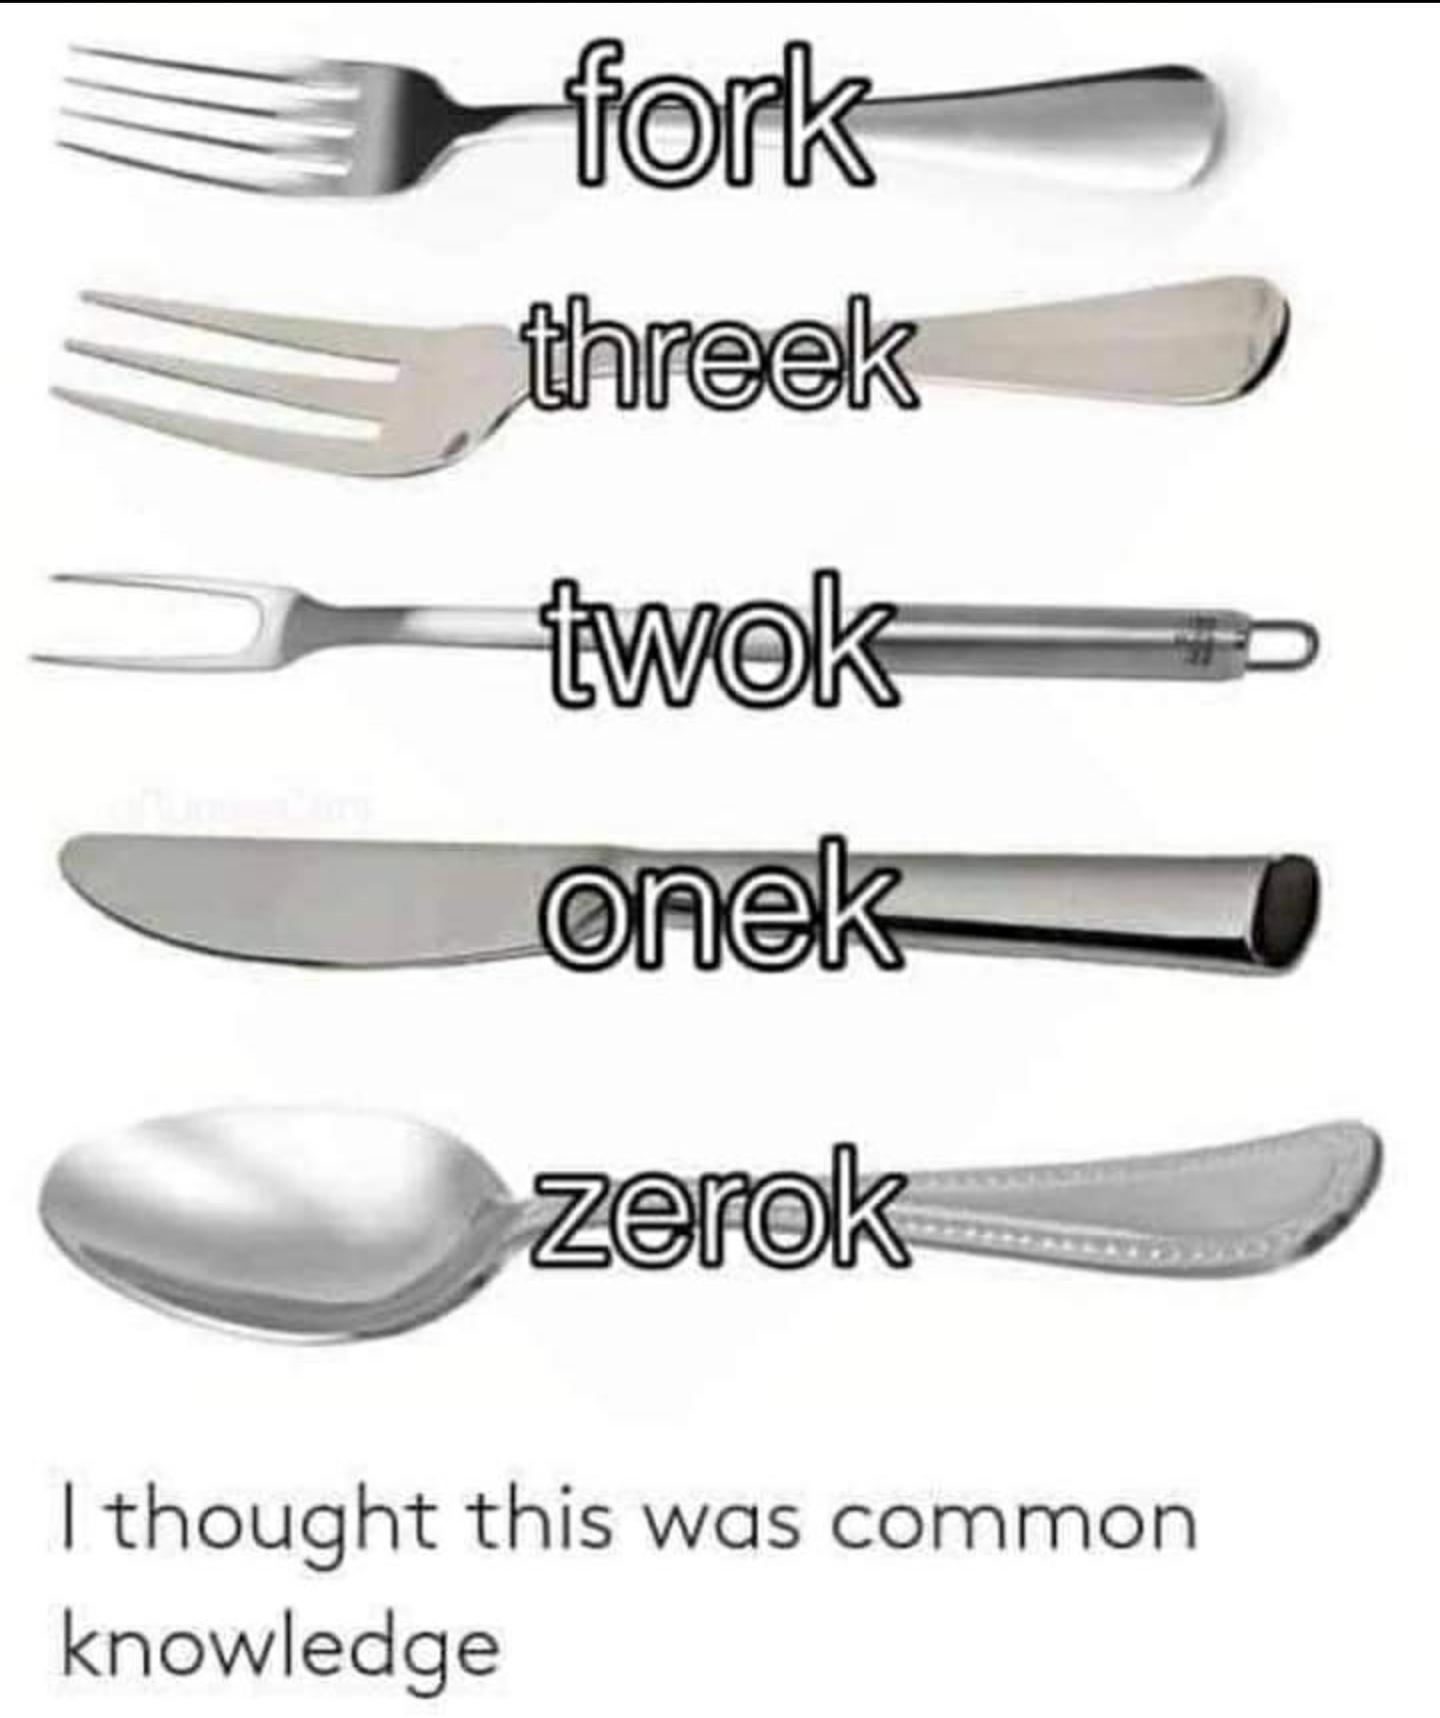 kitchen knife - fork threek twok onek zerok I thought this was common knowledge